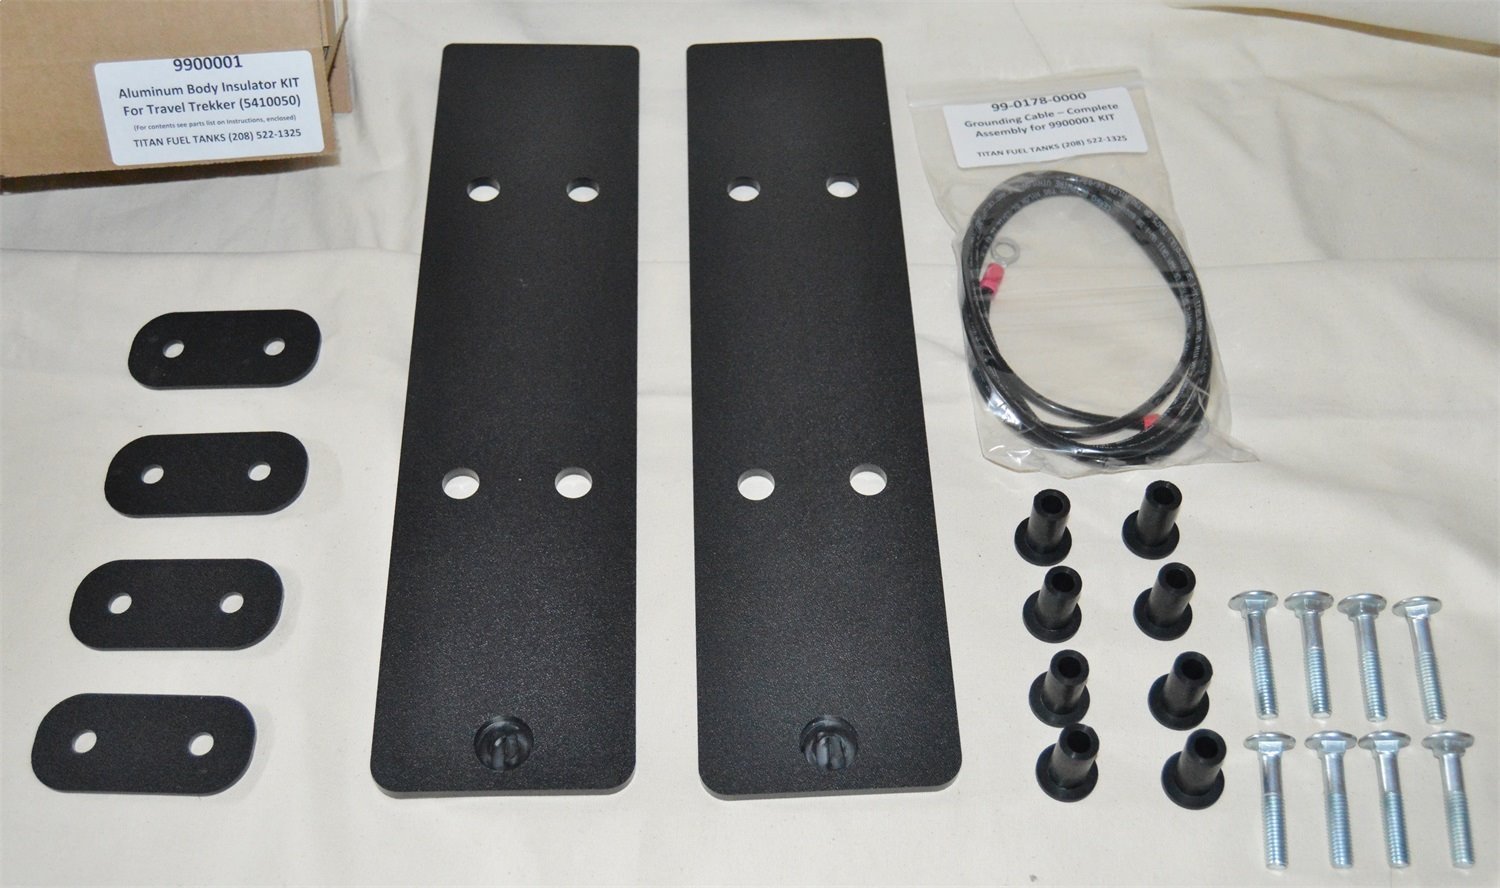 9900001 Aluminum Body Insulator Kit, For Use w/PN[5410050] Tank to Aluminum Beds or Bodies